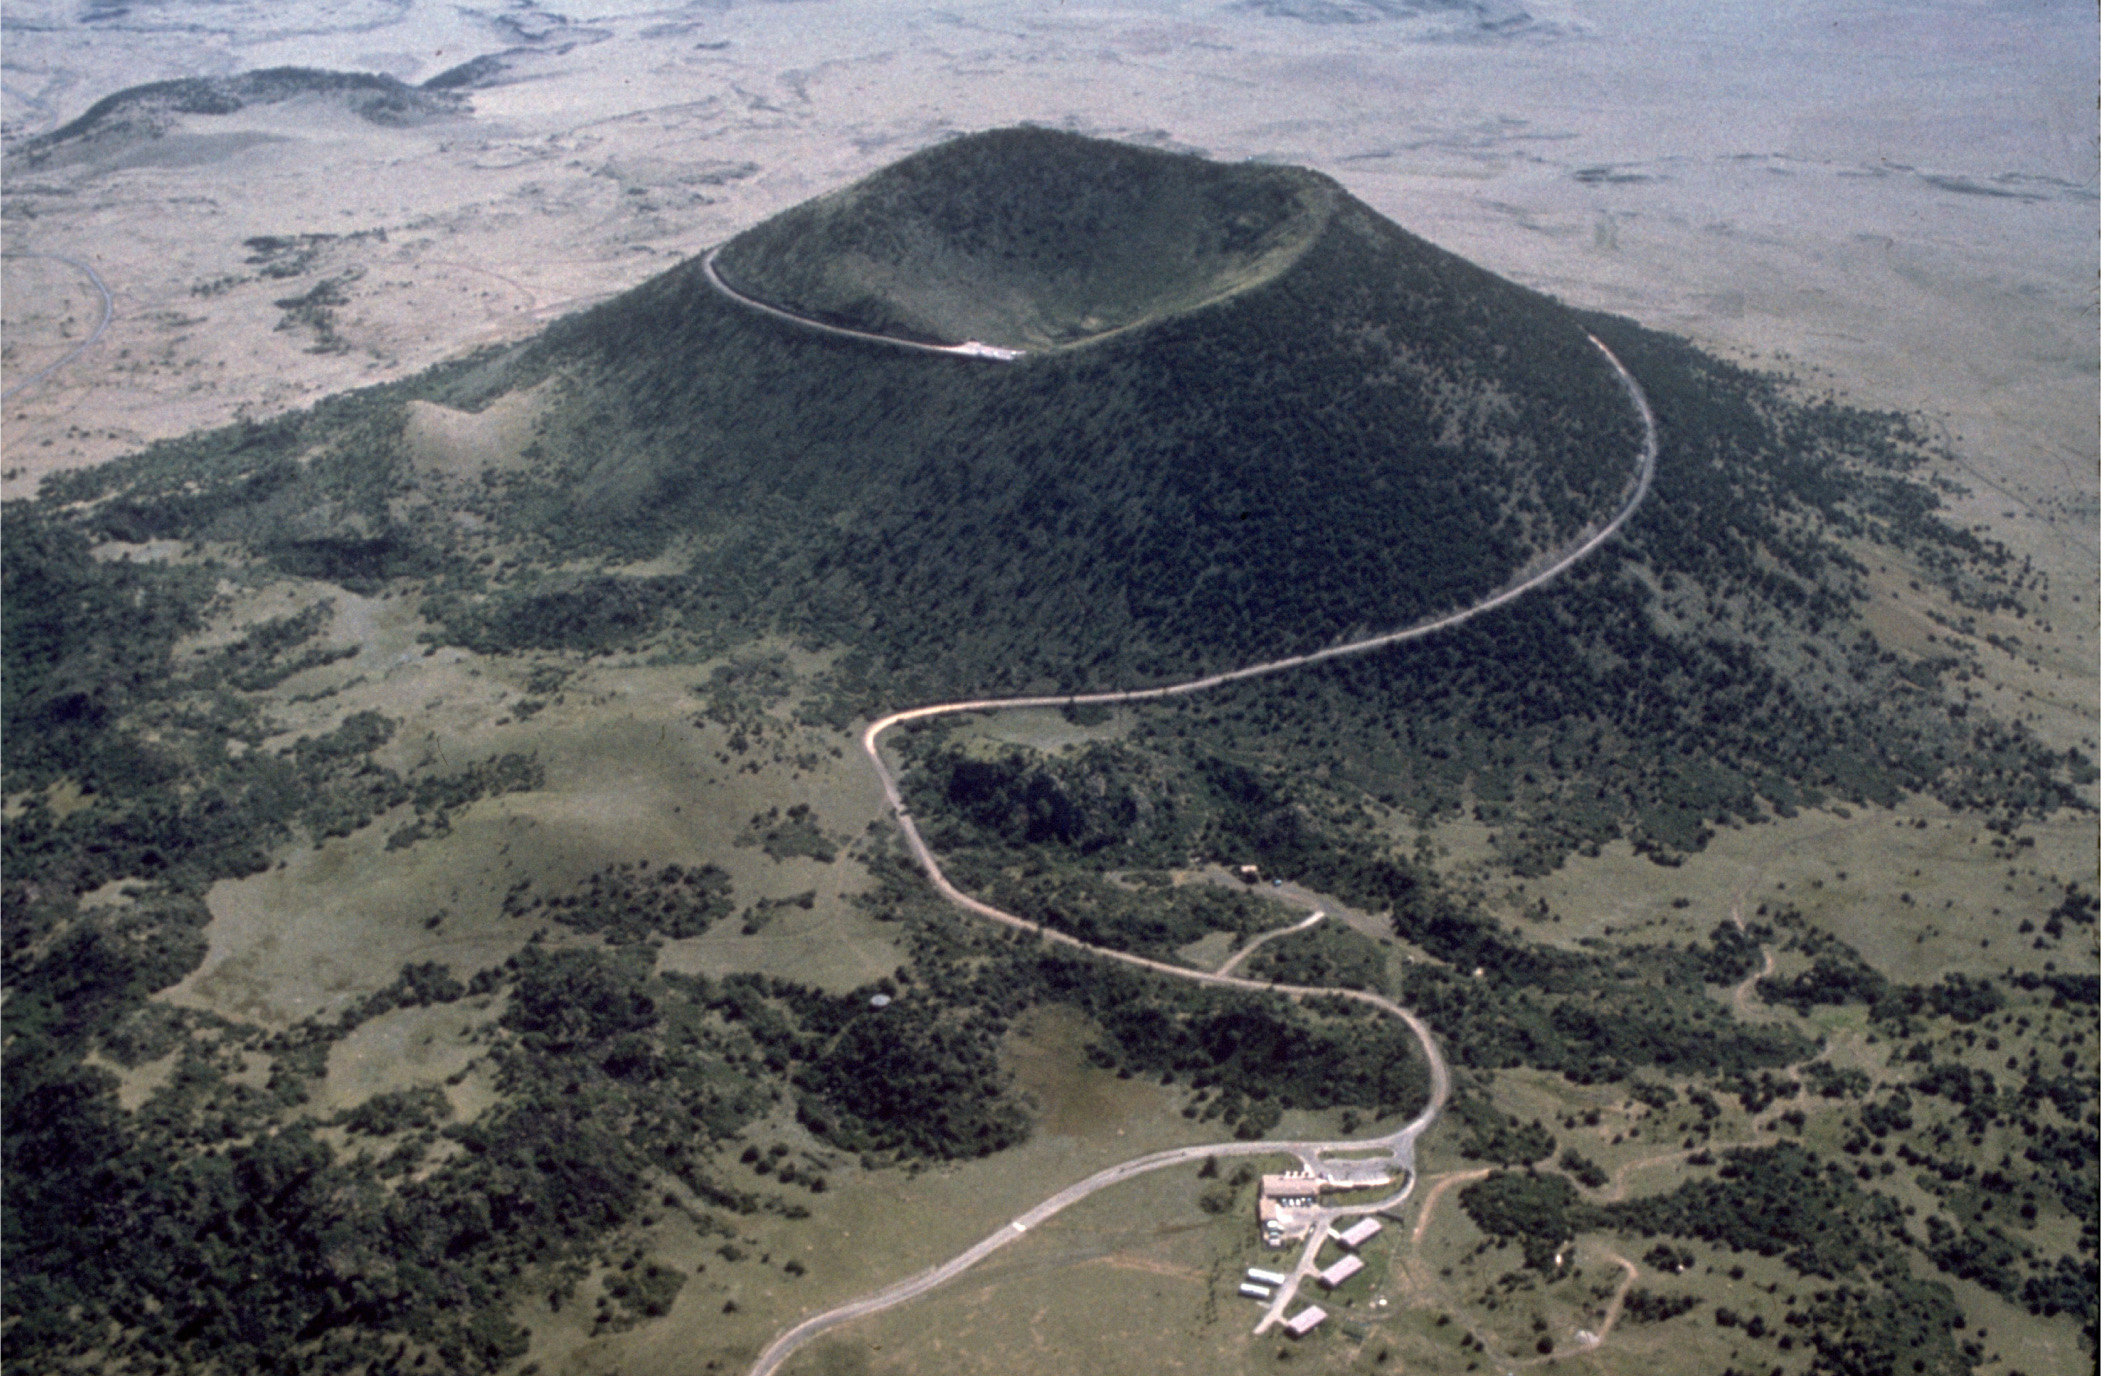 View of cinder cone volcano and the road leading to the top of the volcano as seen from the air.